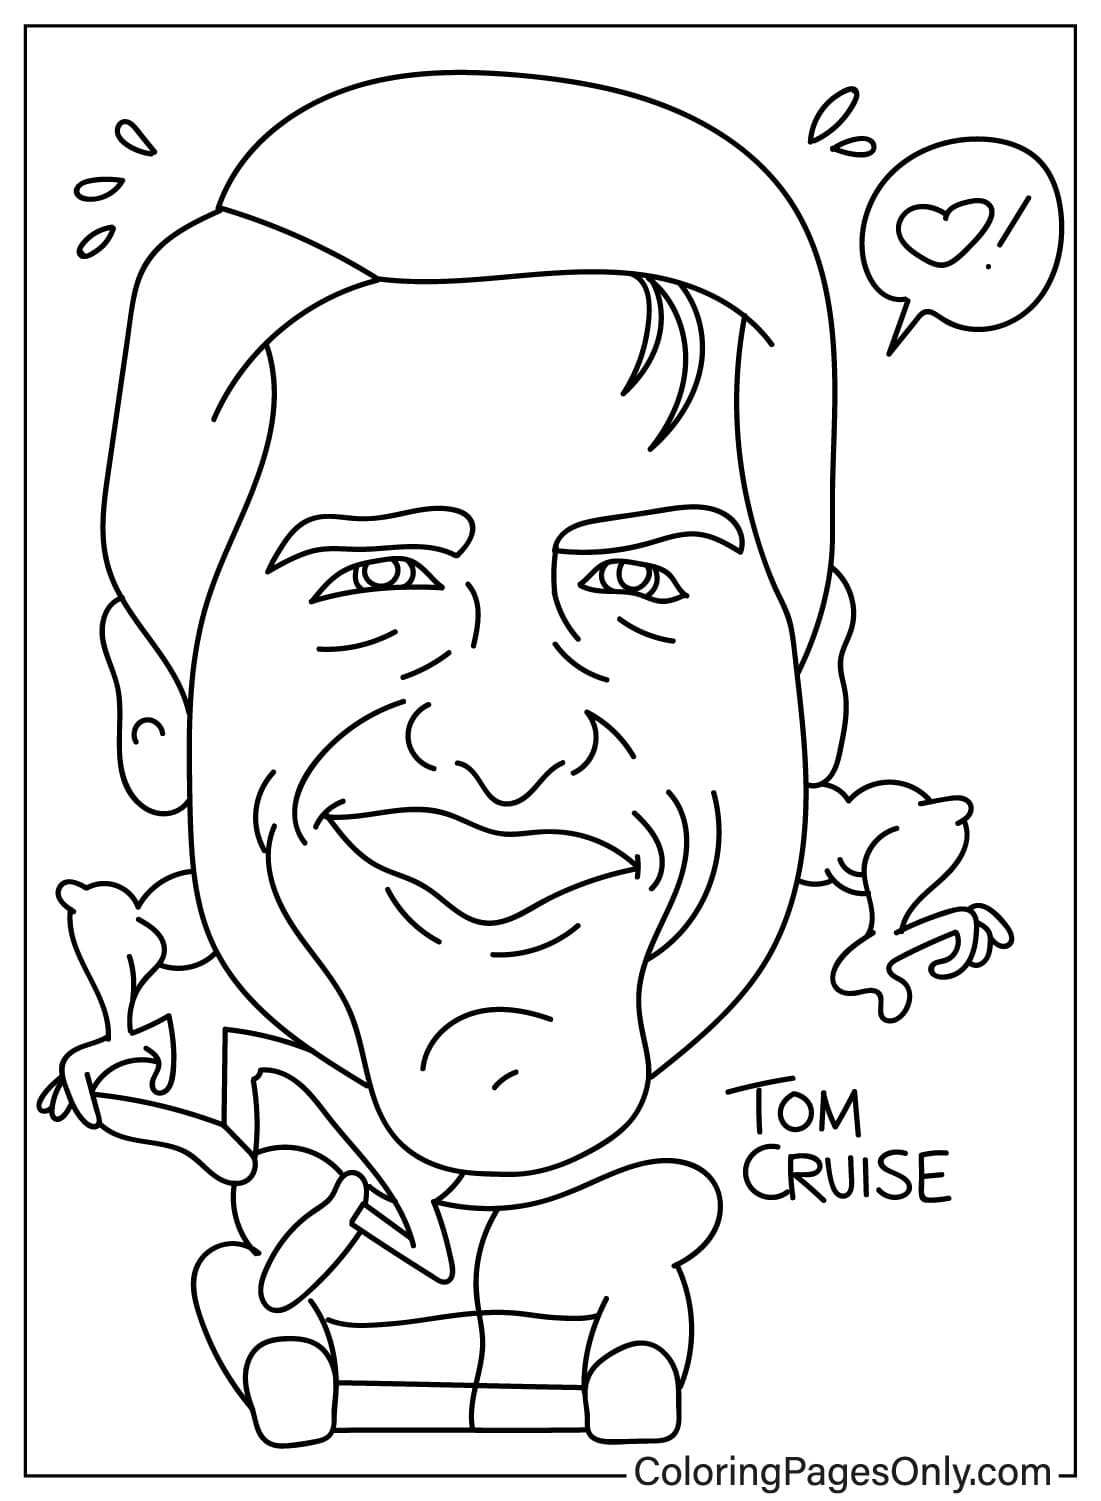 Coloring Page Tom Cruise from Tom Cruise